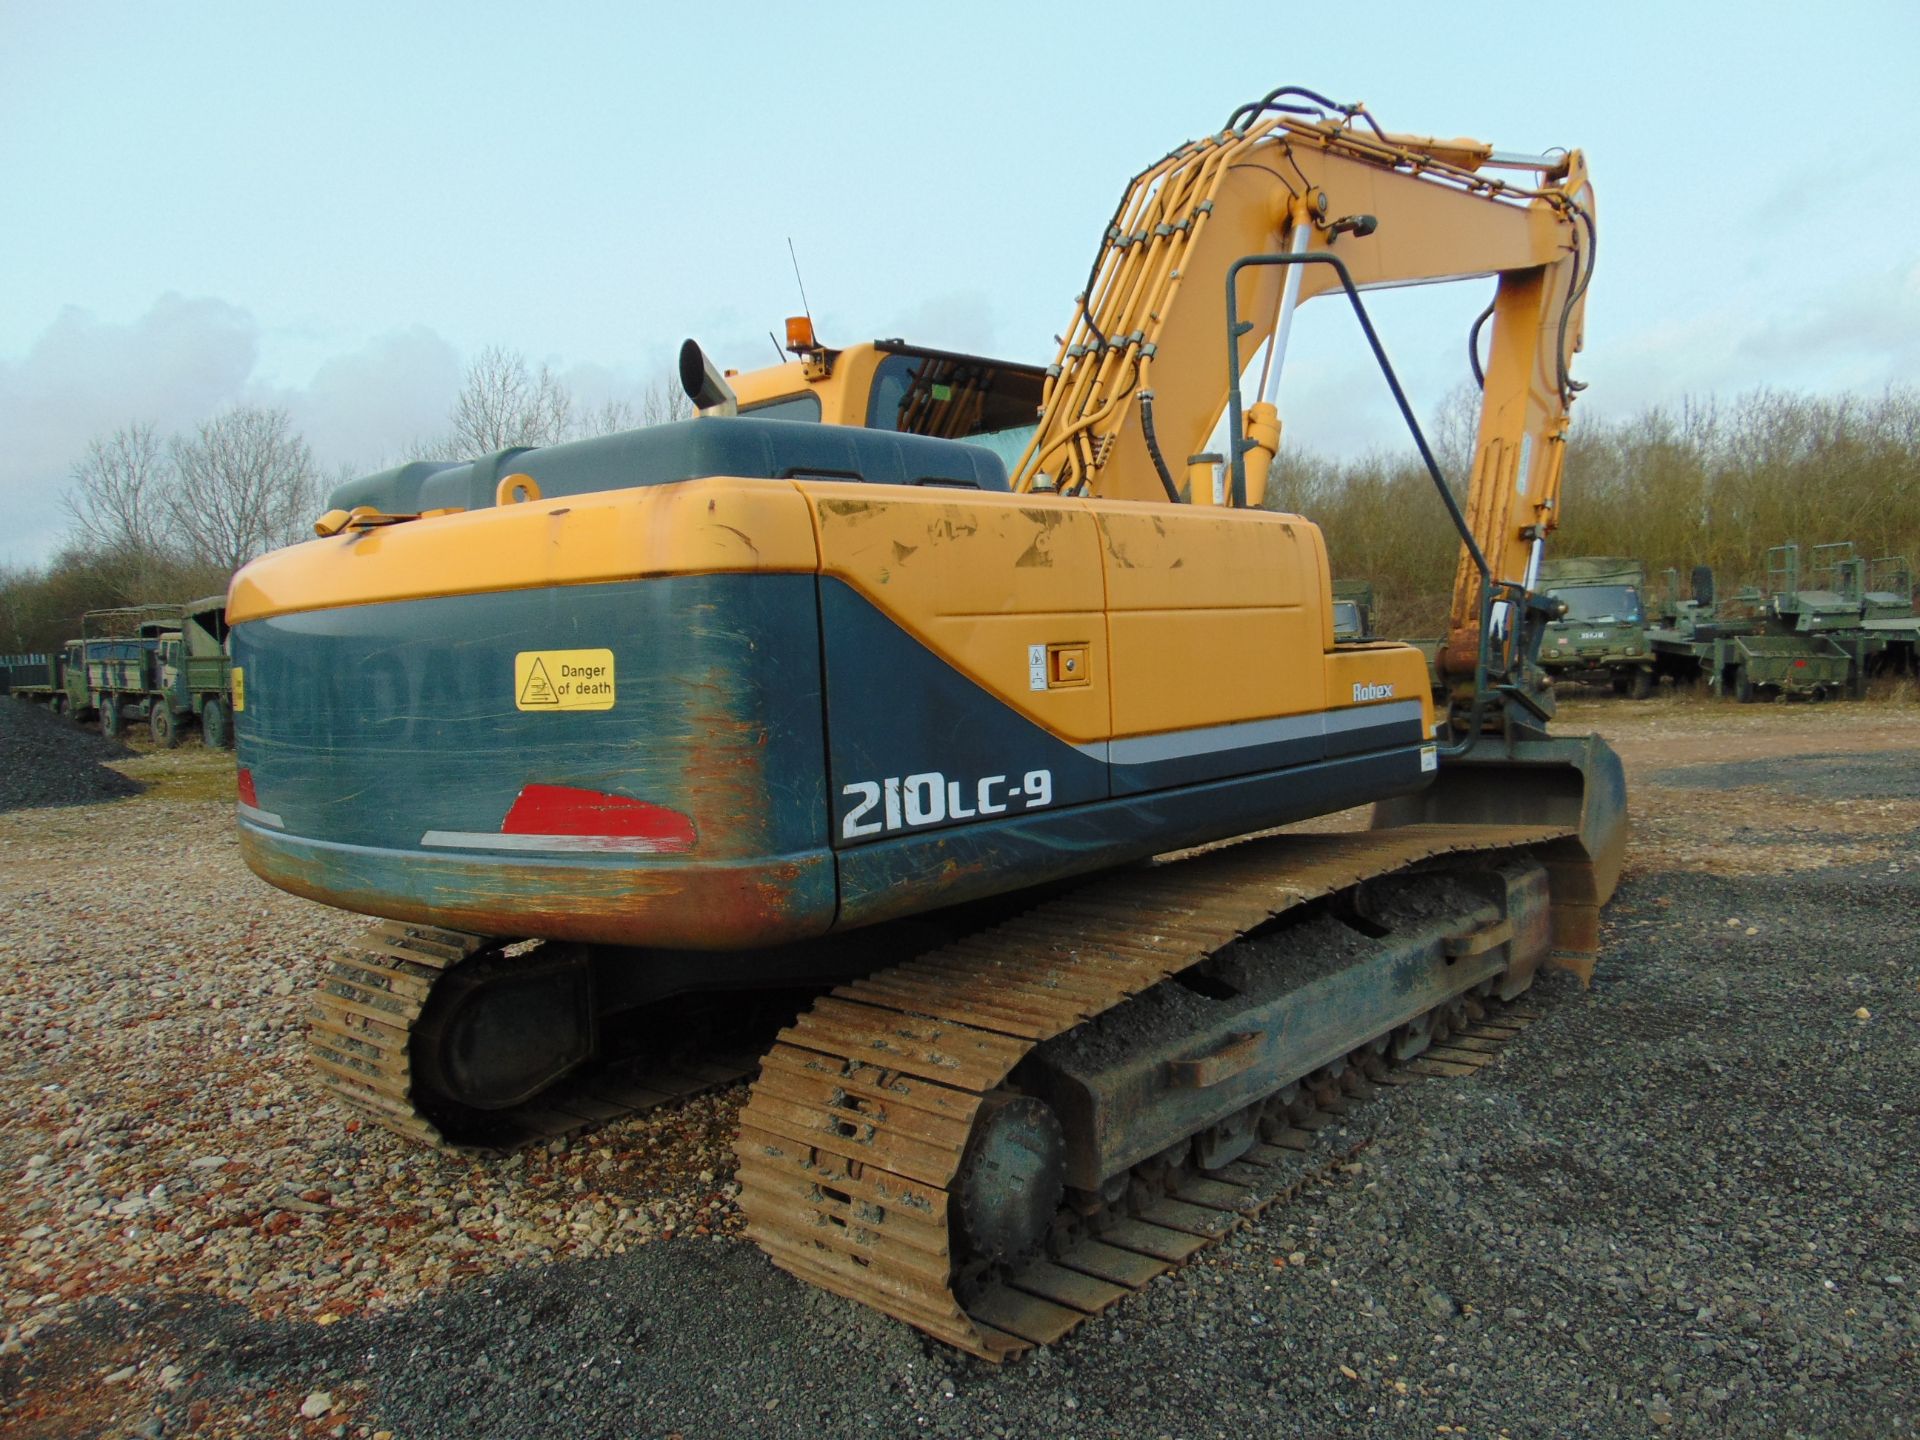 2012 Hyundai Robex 210 LC-9 Crawler Excavator ONLY 1,148 Hours Warranted. - Image 8 of 25